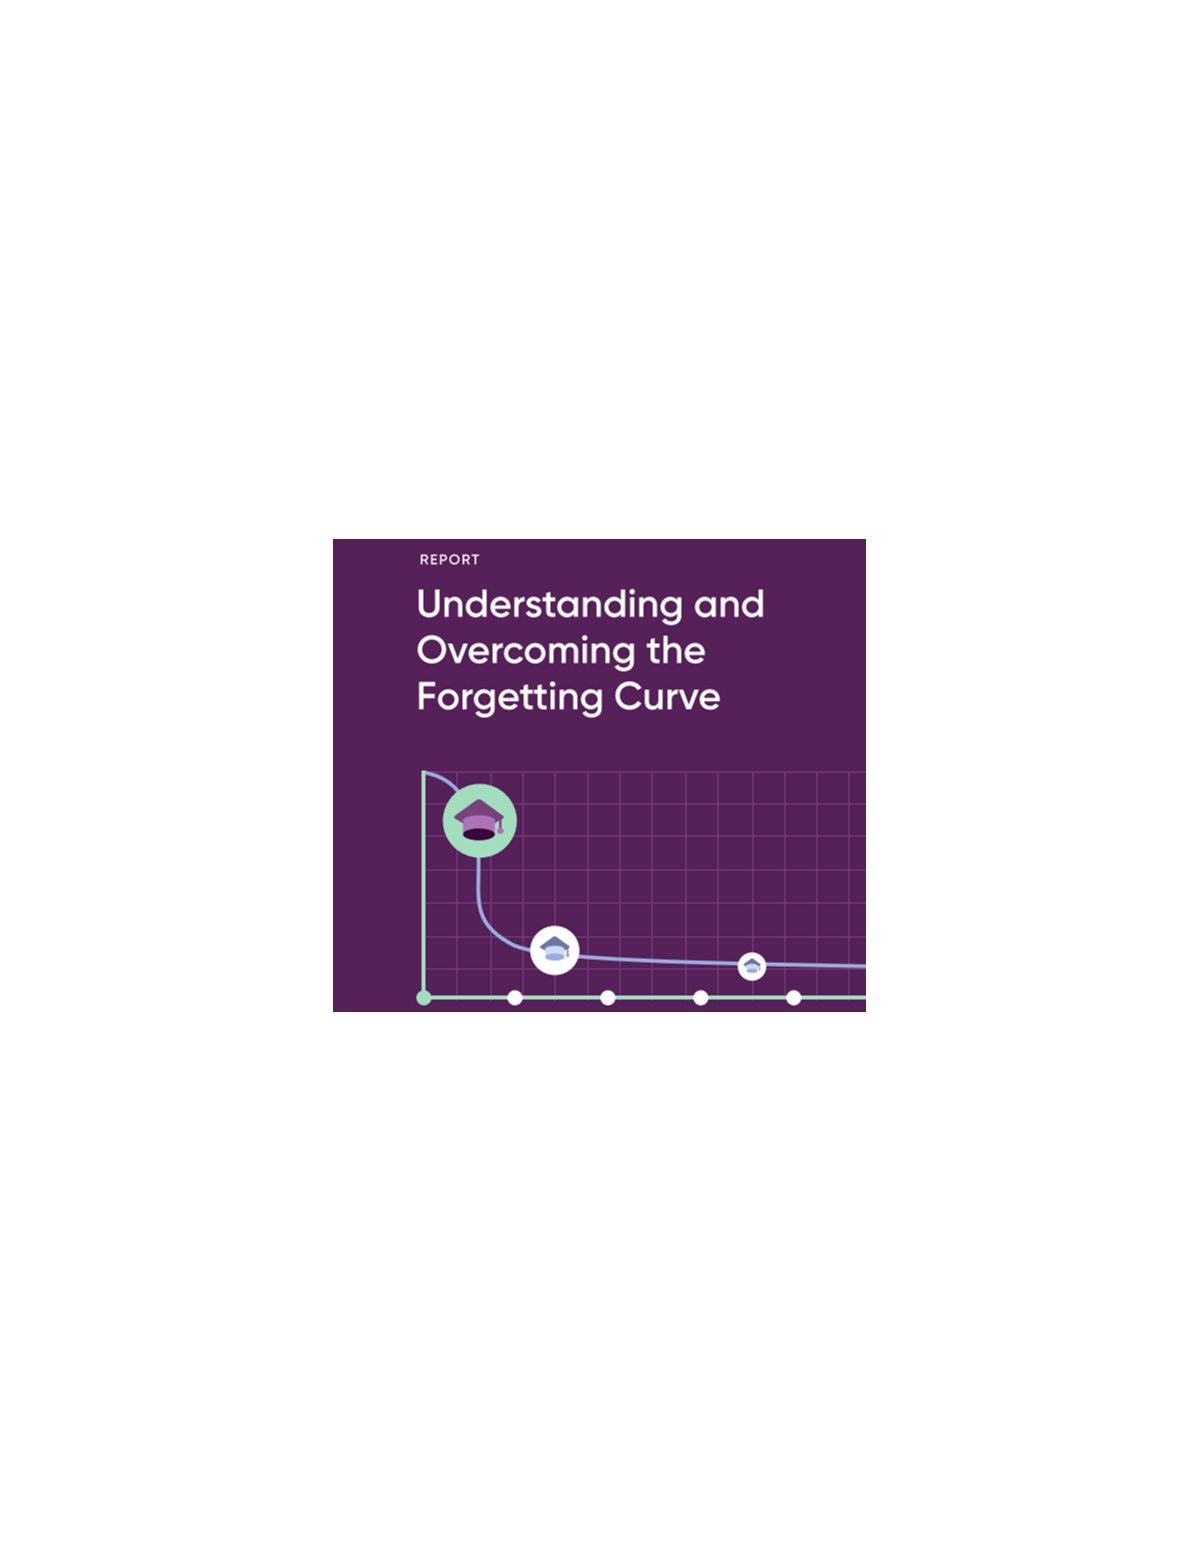 Understanding and Overcoming the Forgetting Curve